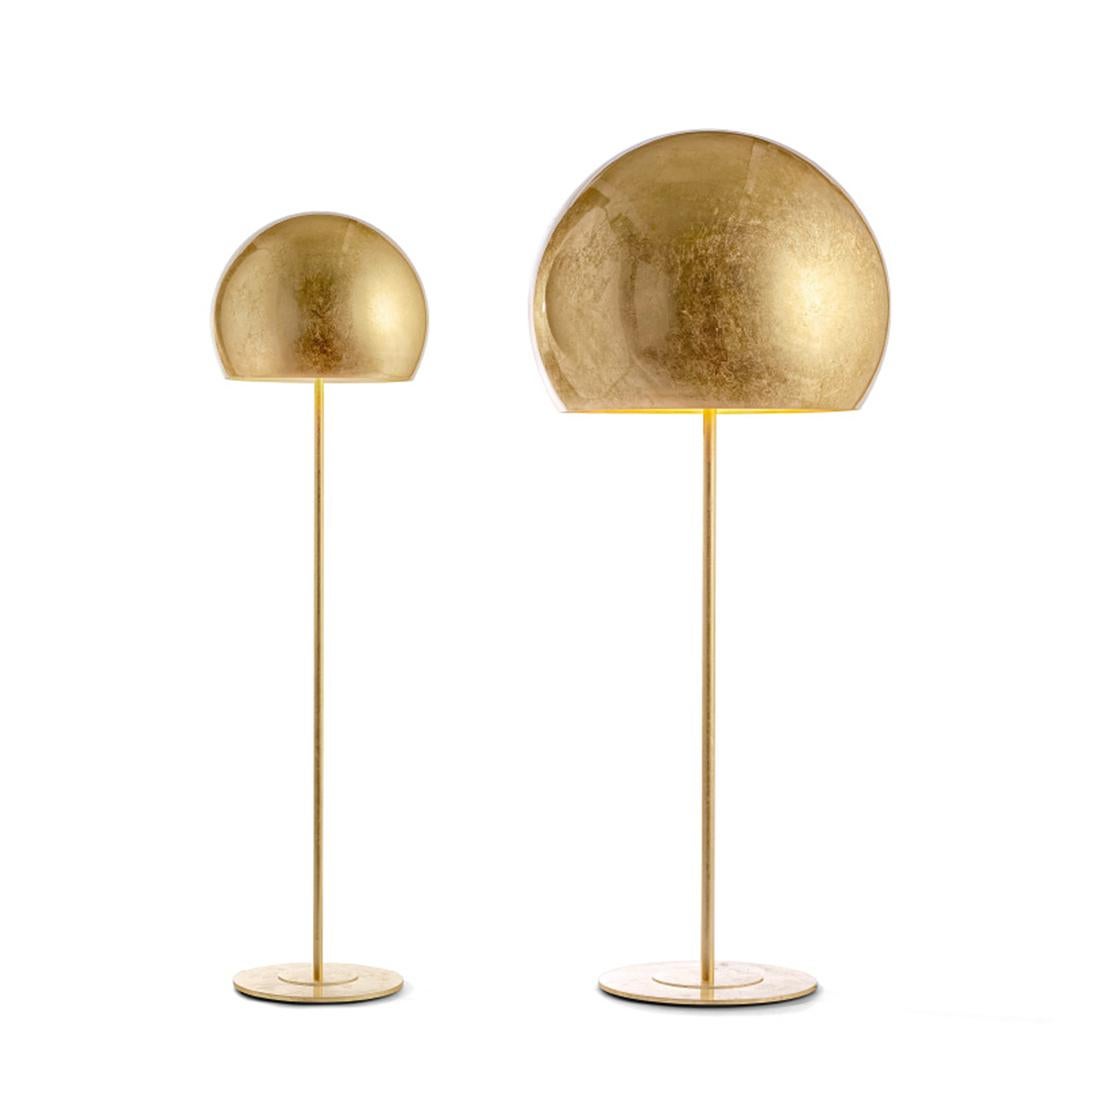 Floor lamp dome gold leaf with iron base and feet
and with aluminum shade all covered with gold leaf
and in gold varnished inside shade. With 2 bulbs, lamp
holder type E27, max 60 watt. Bulbs not included.
In Ø80 x H188cm, price: 6300,00€.
Also